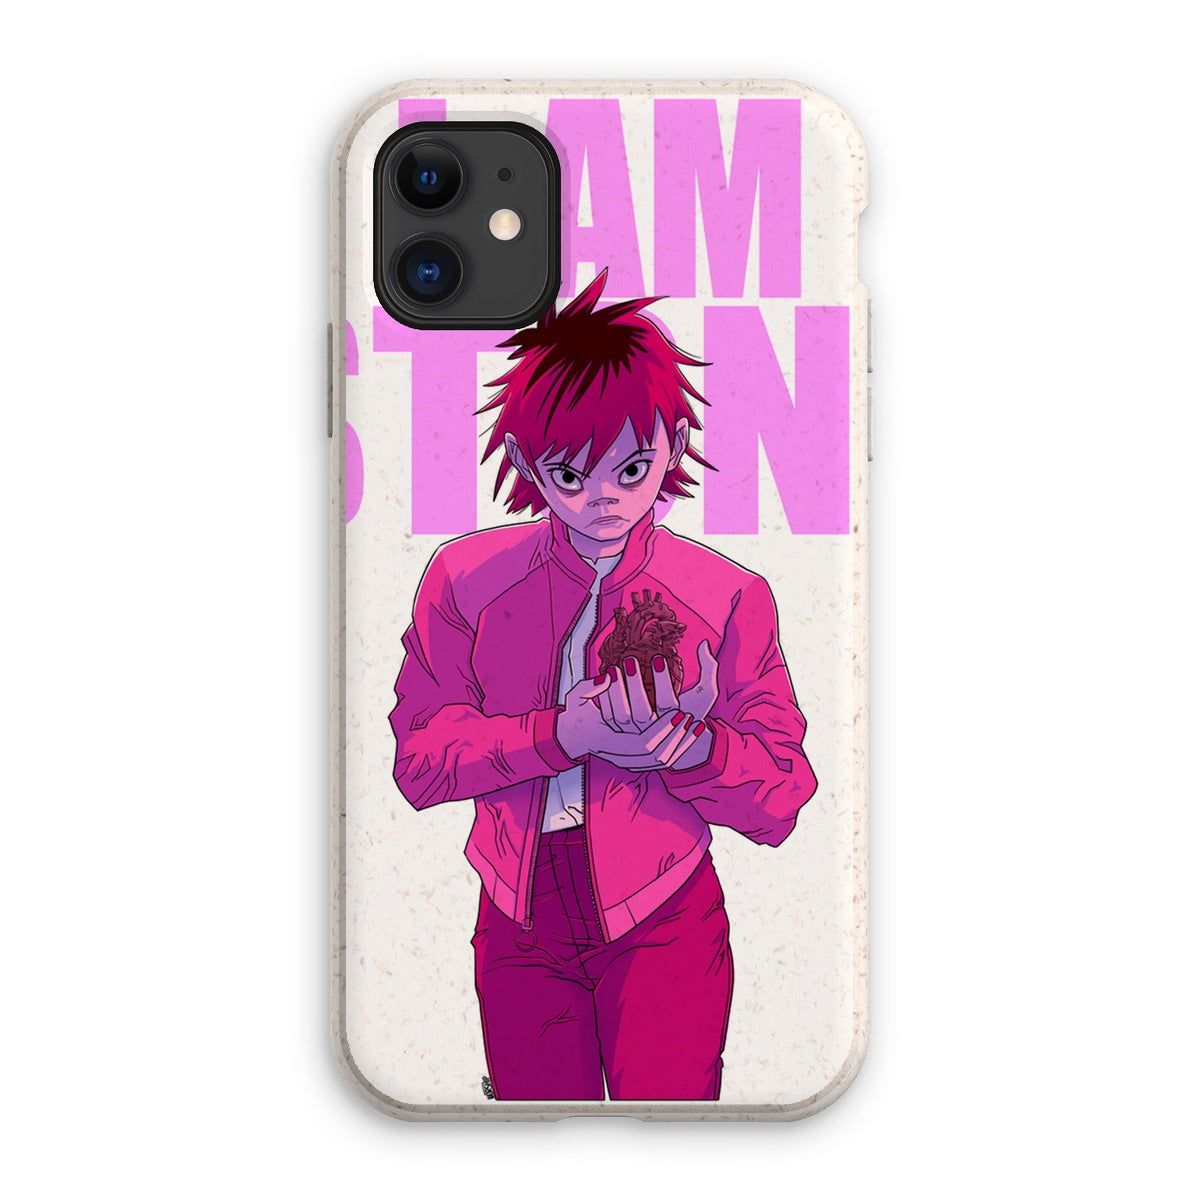 Unique and cool Gorillaz-style heart of stone phone case illustration